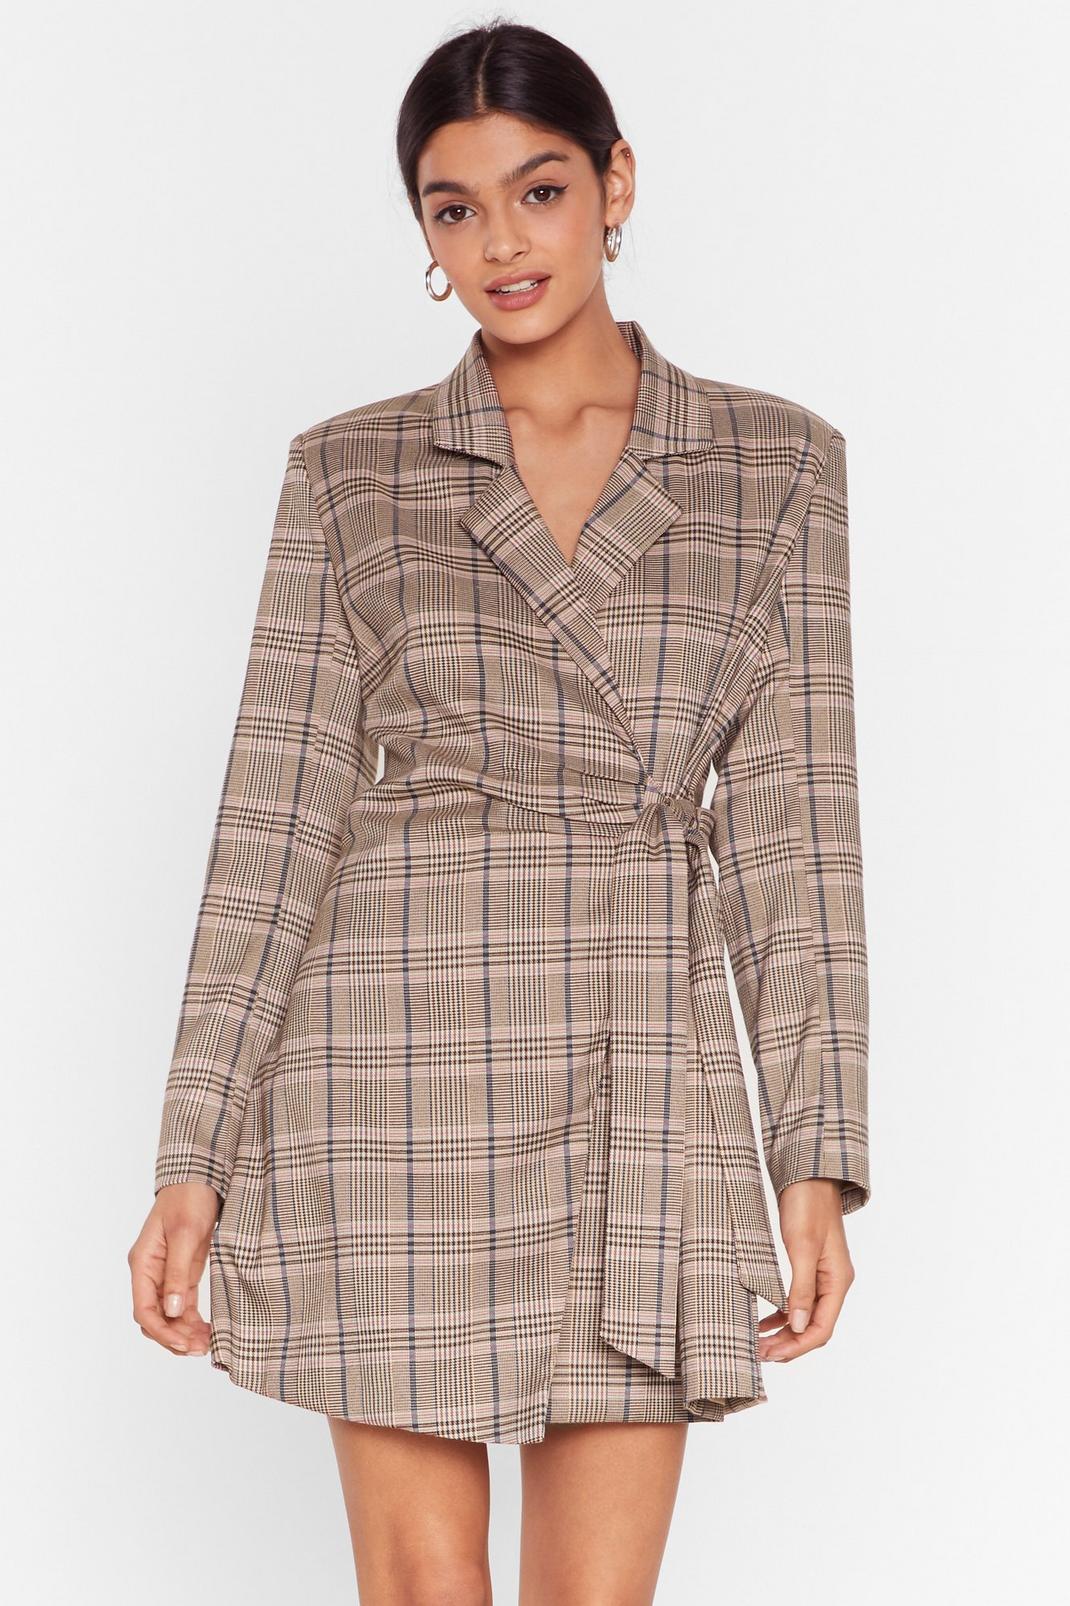 Mini Blazer Dress with Check Print Throughout image number 1